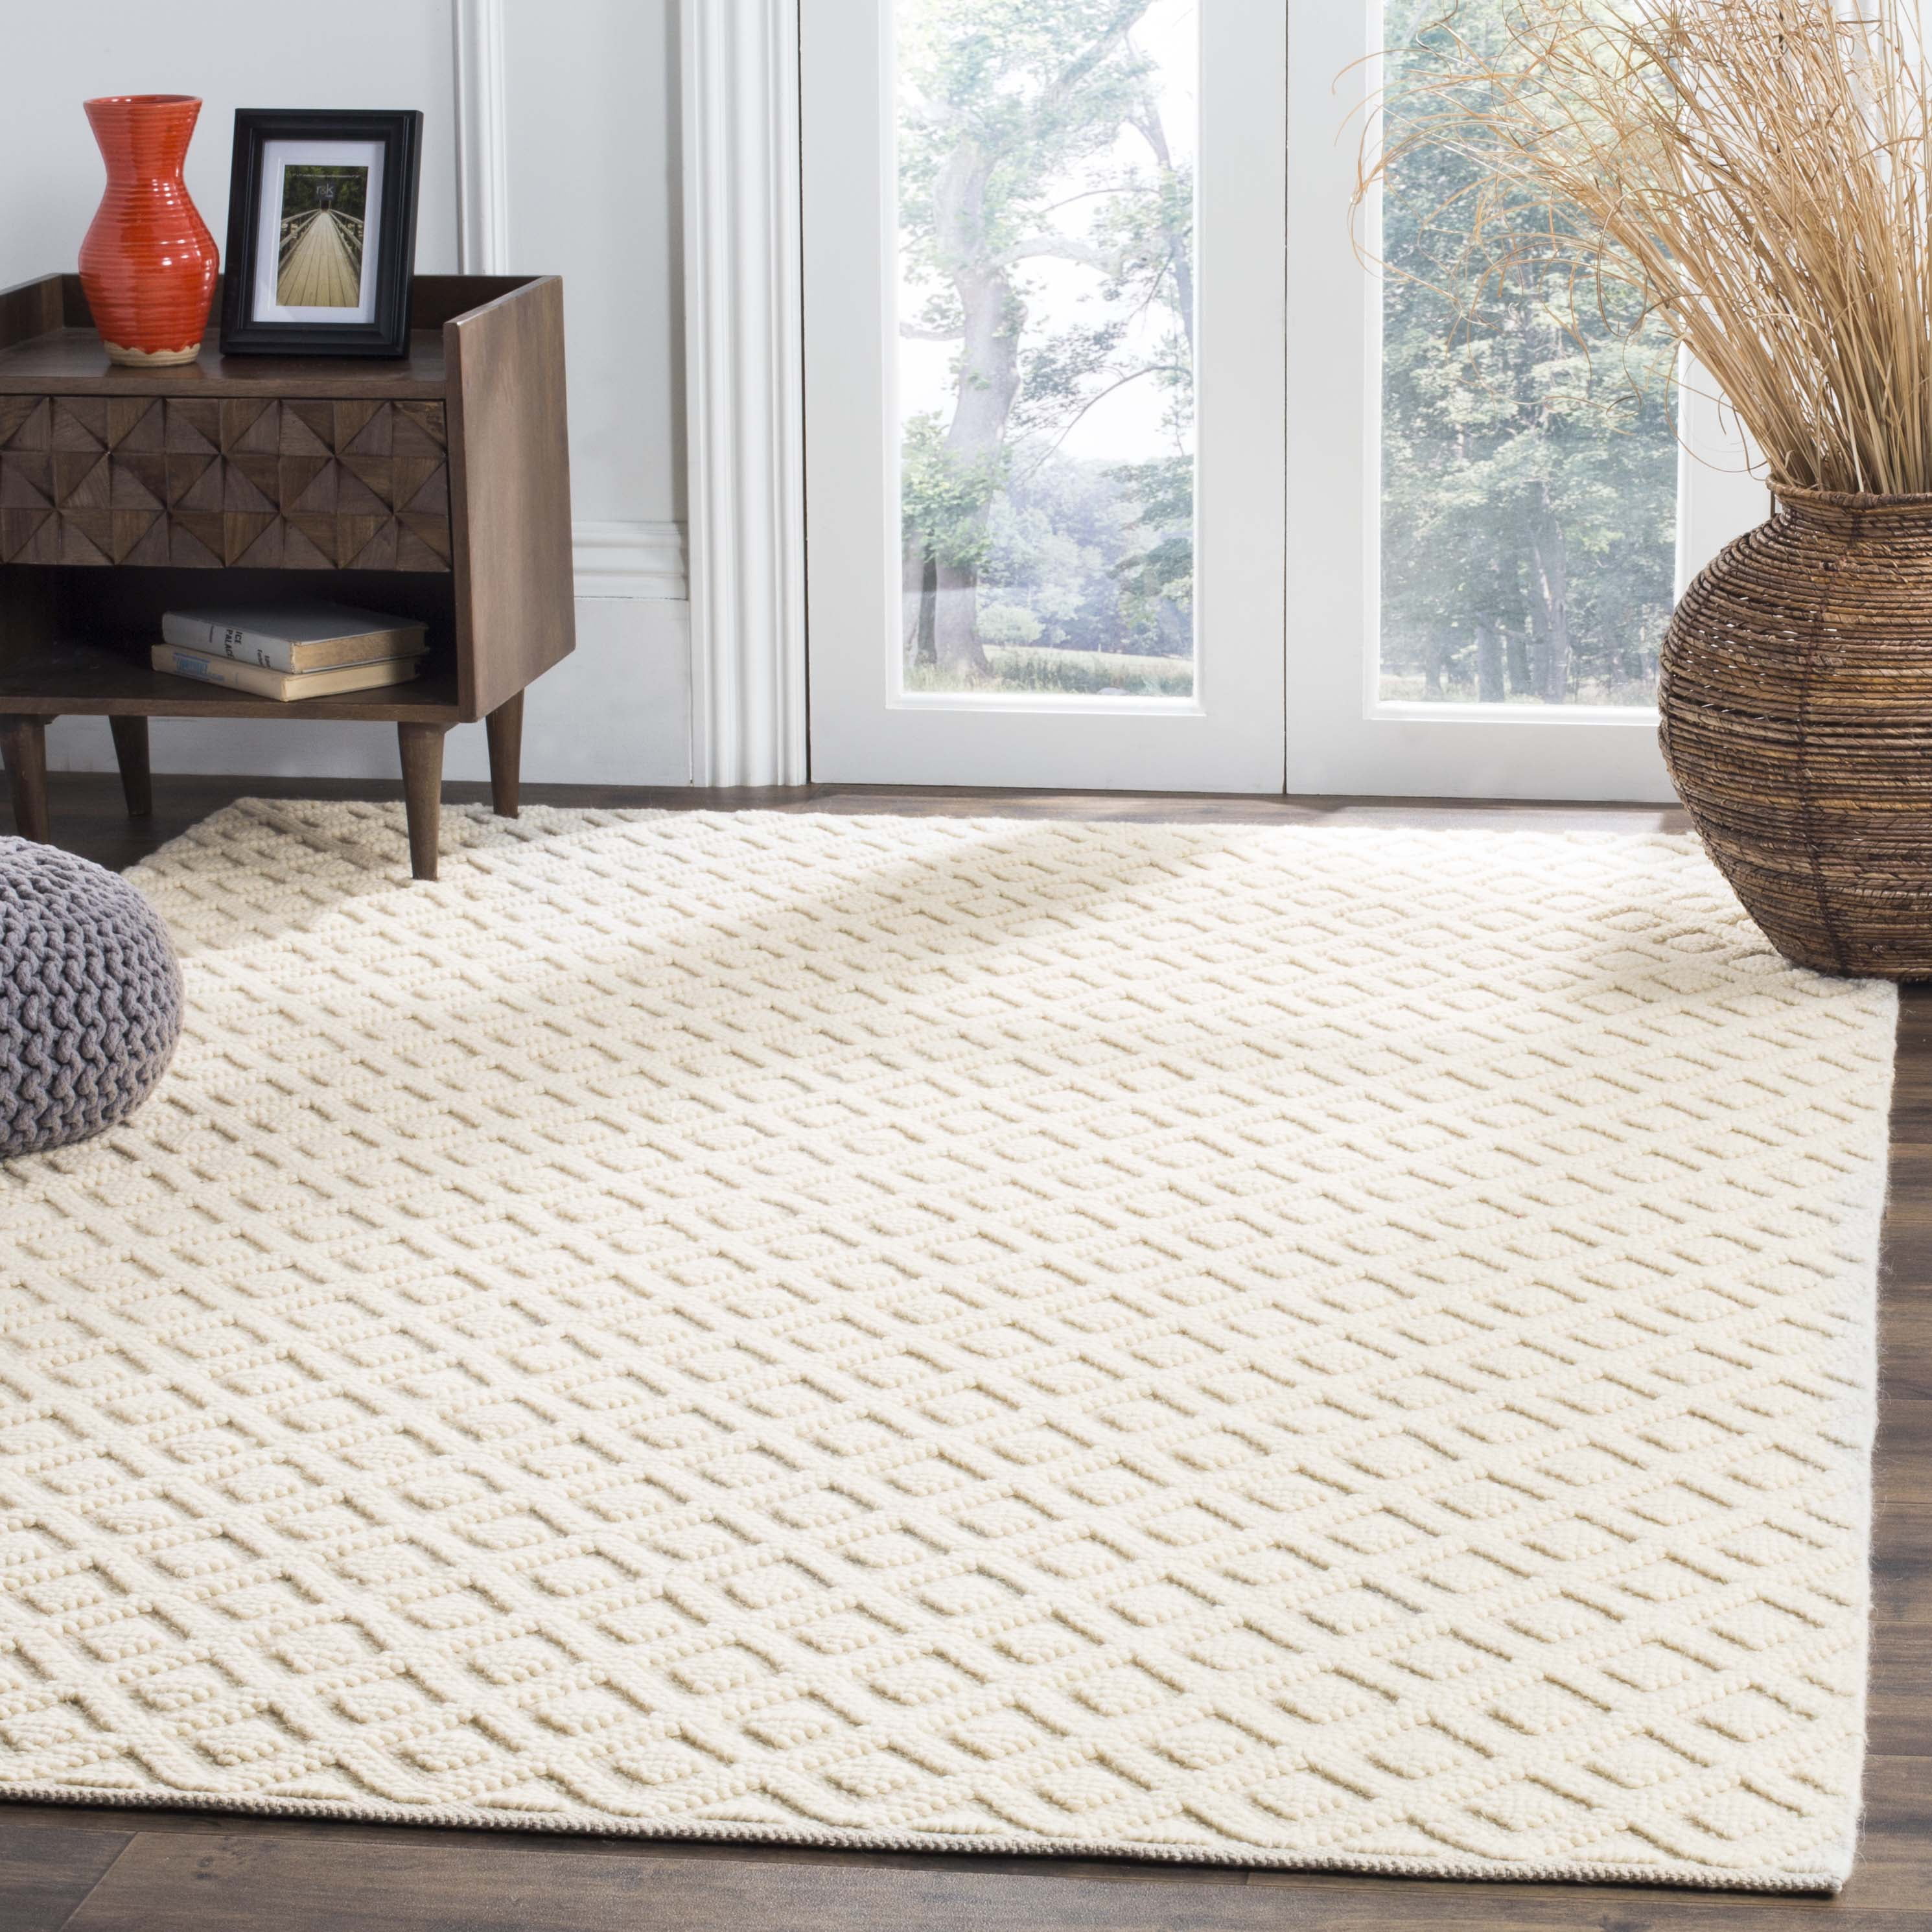 VERMONT  WOVEN  2x4 Wool Rug  Grey